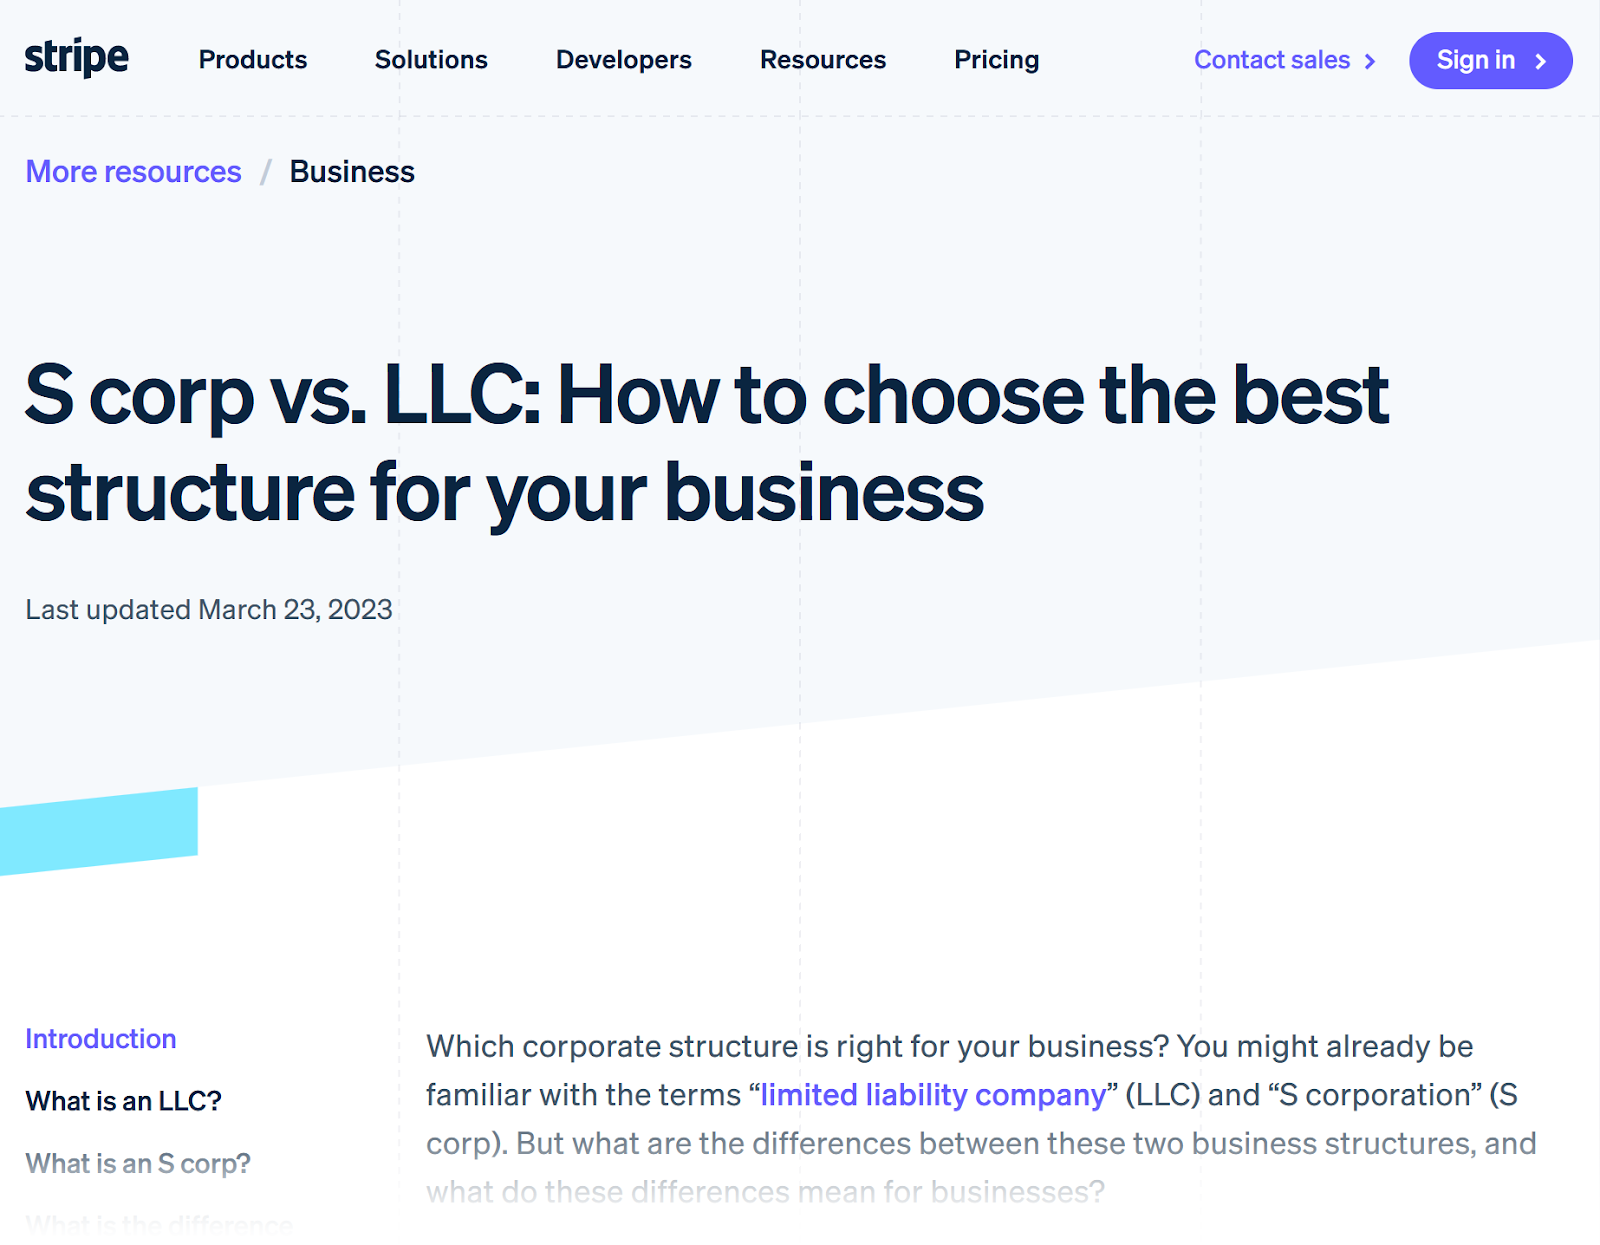 Stripe's article on how to choose the best structure for your business.